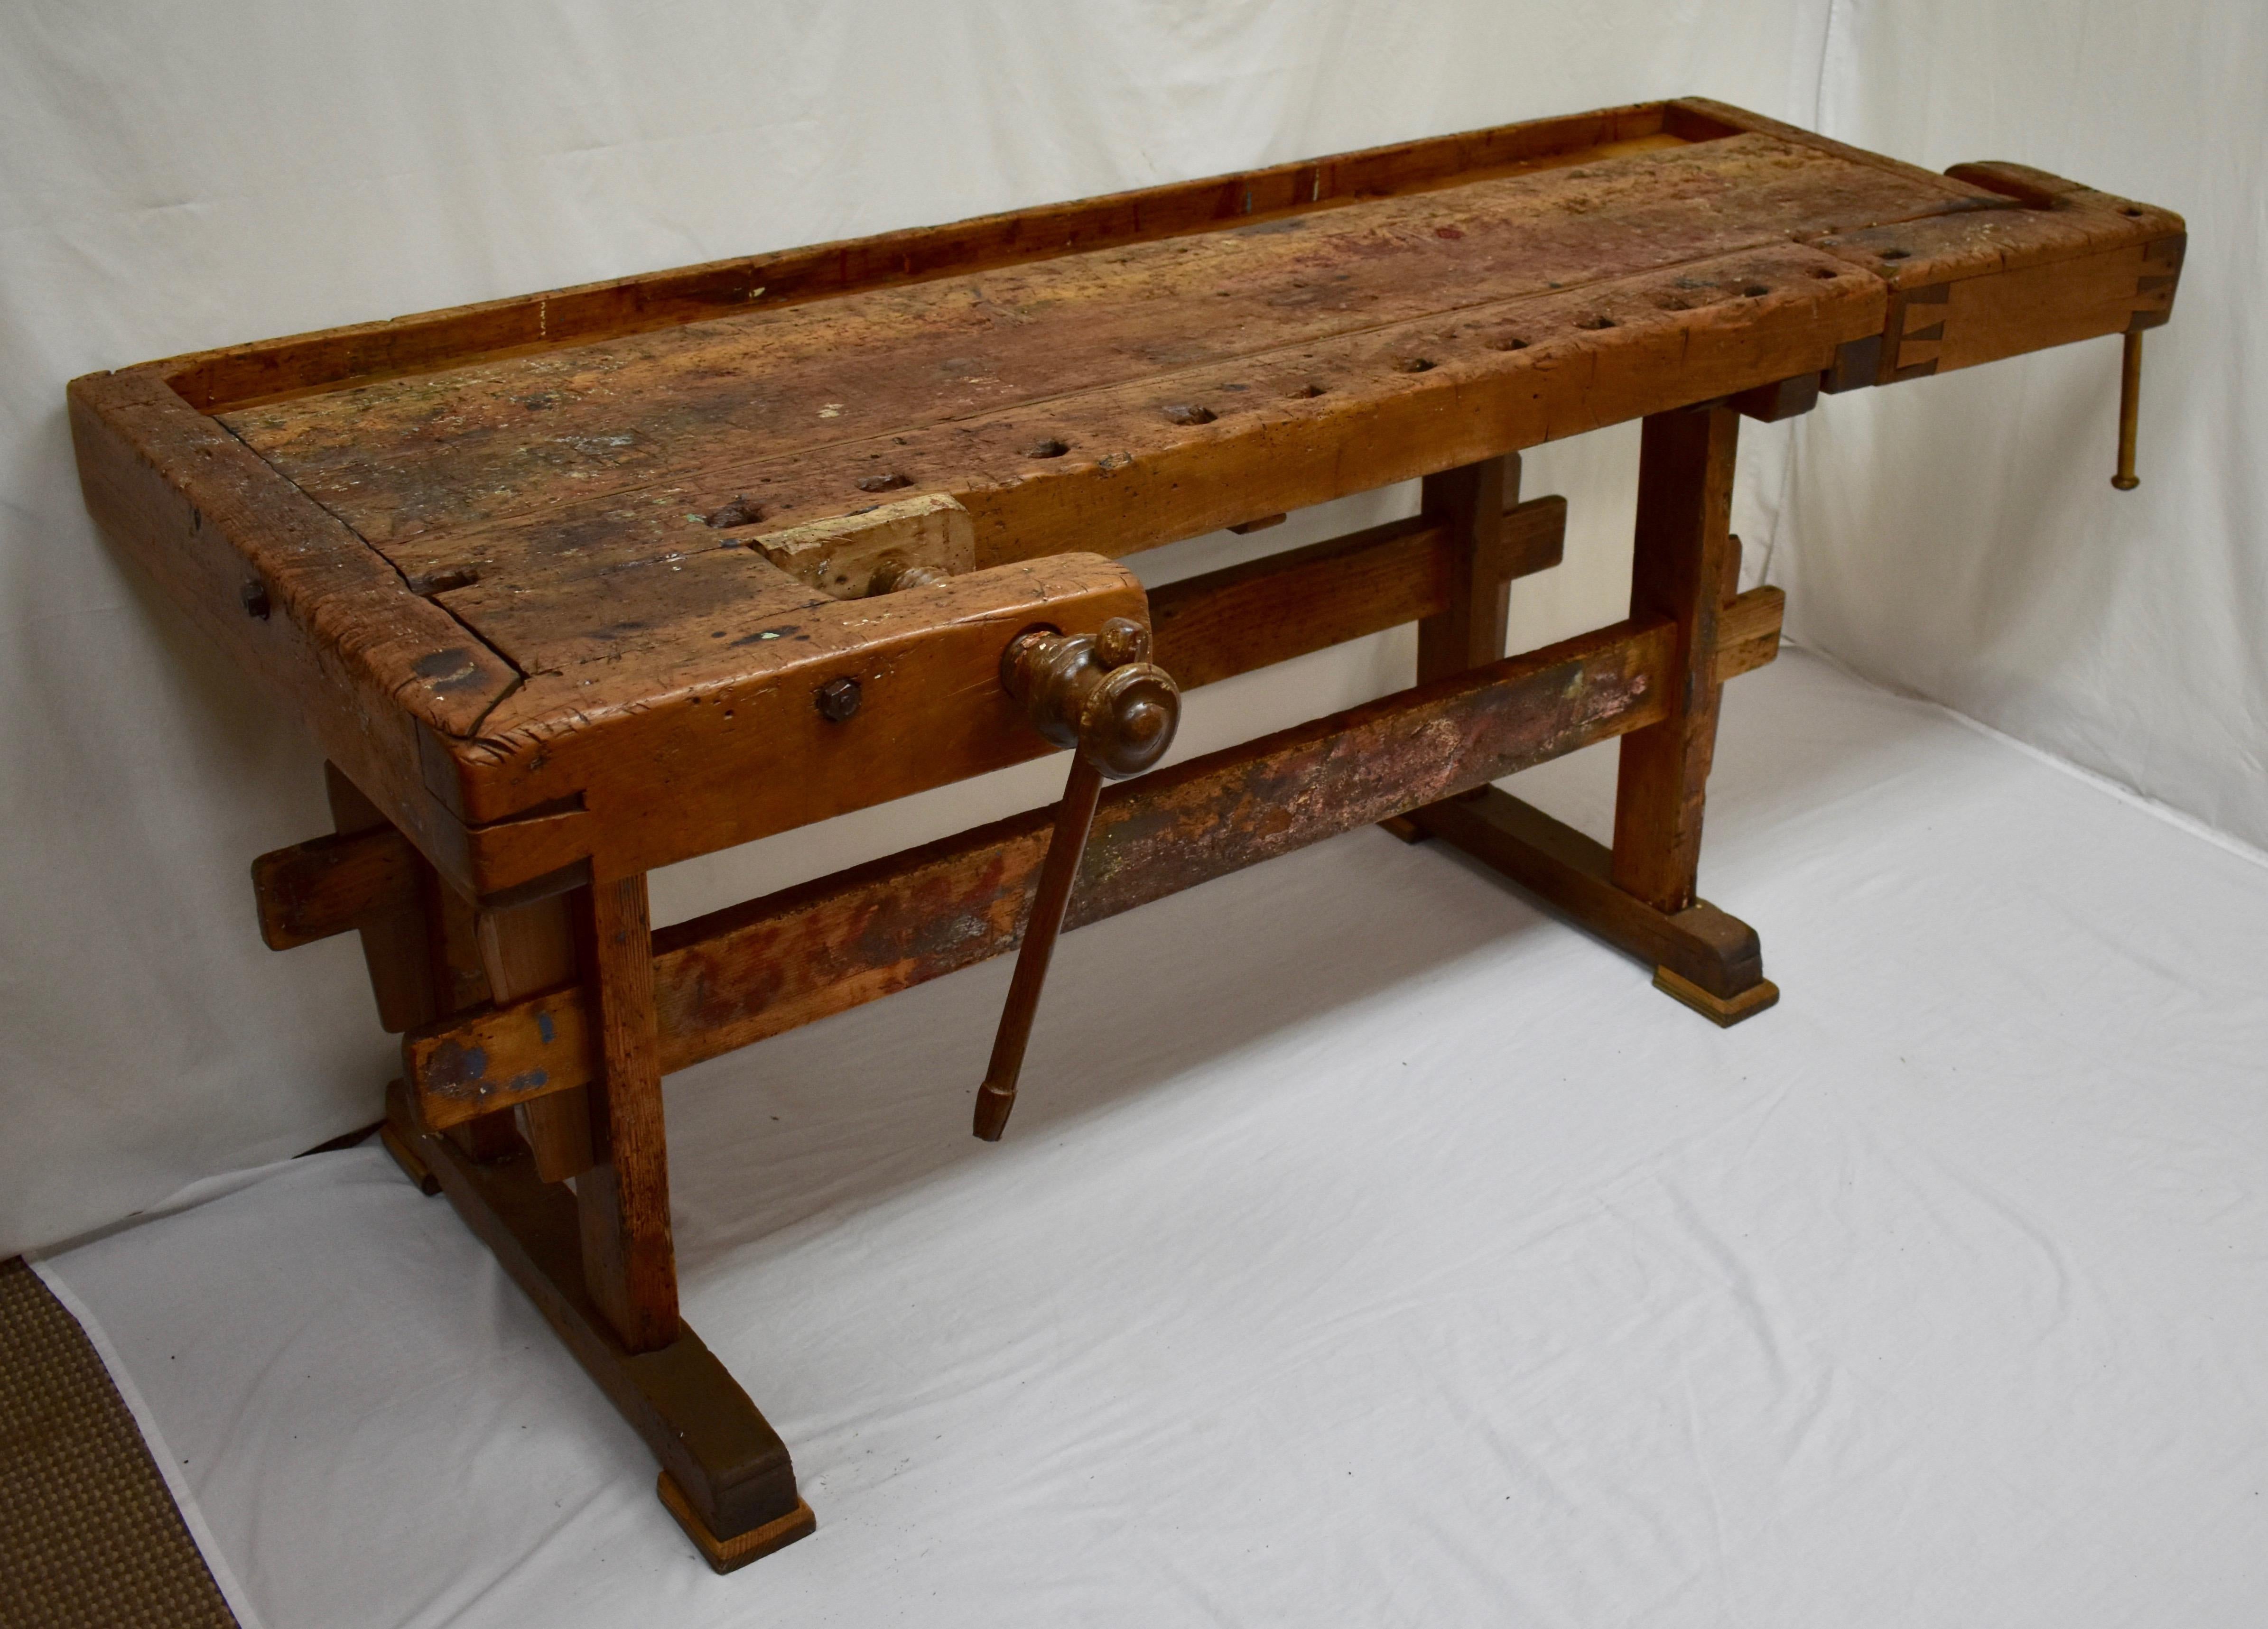 This massive oak Joiner’s workbench is built as solid as a rock and has been chopped, scraped, scratched and whacked through decades of purposeful use. The trestle-style base is made of pine and oak. The uprights are 2” x 4” boards of yellow pine,